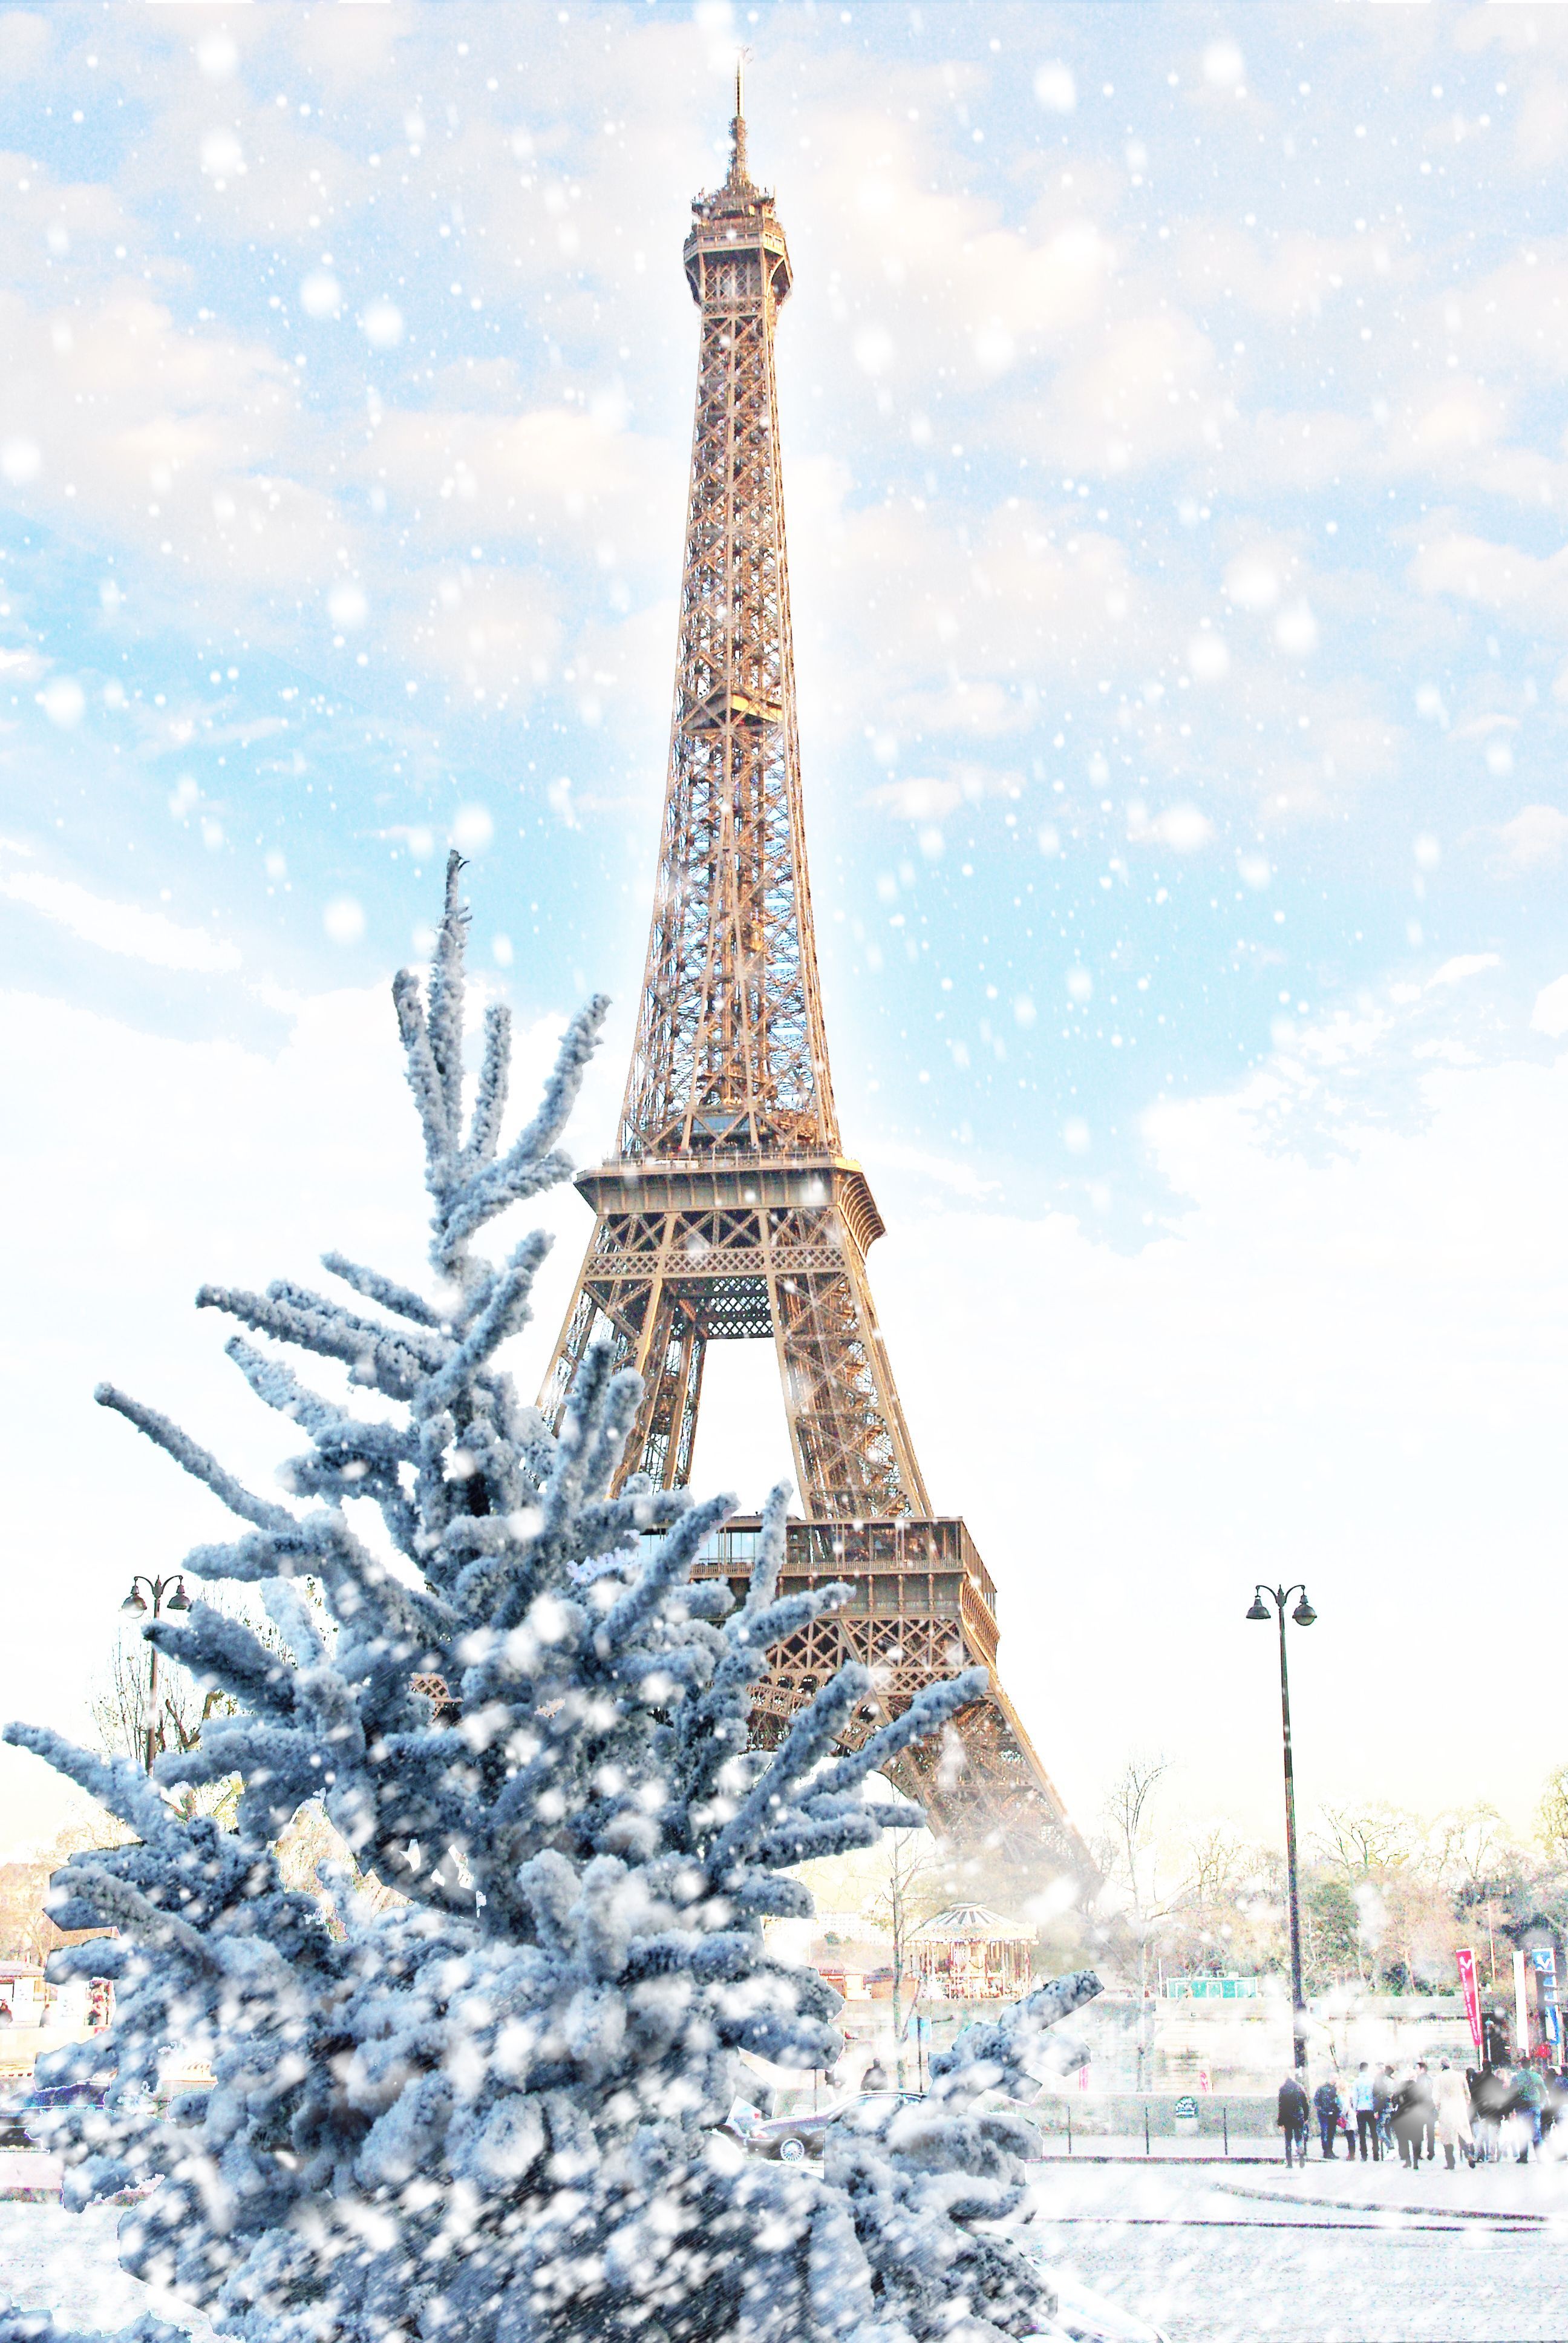 Today is the 1st day of Winter in France! Discover my Winter Wonderland! #MonHiverAParisIDF #Christ. Paris wallpaper, Eiffel tower photography, Christmas in paris